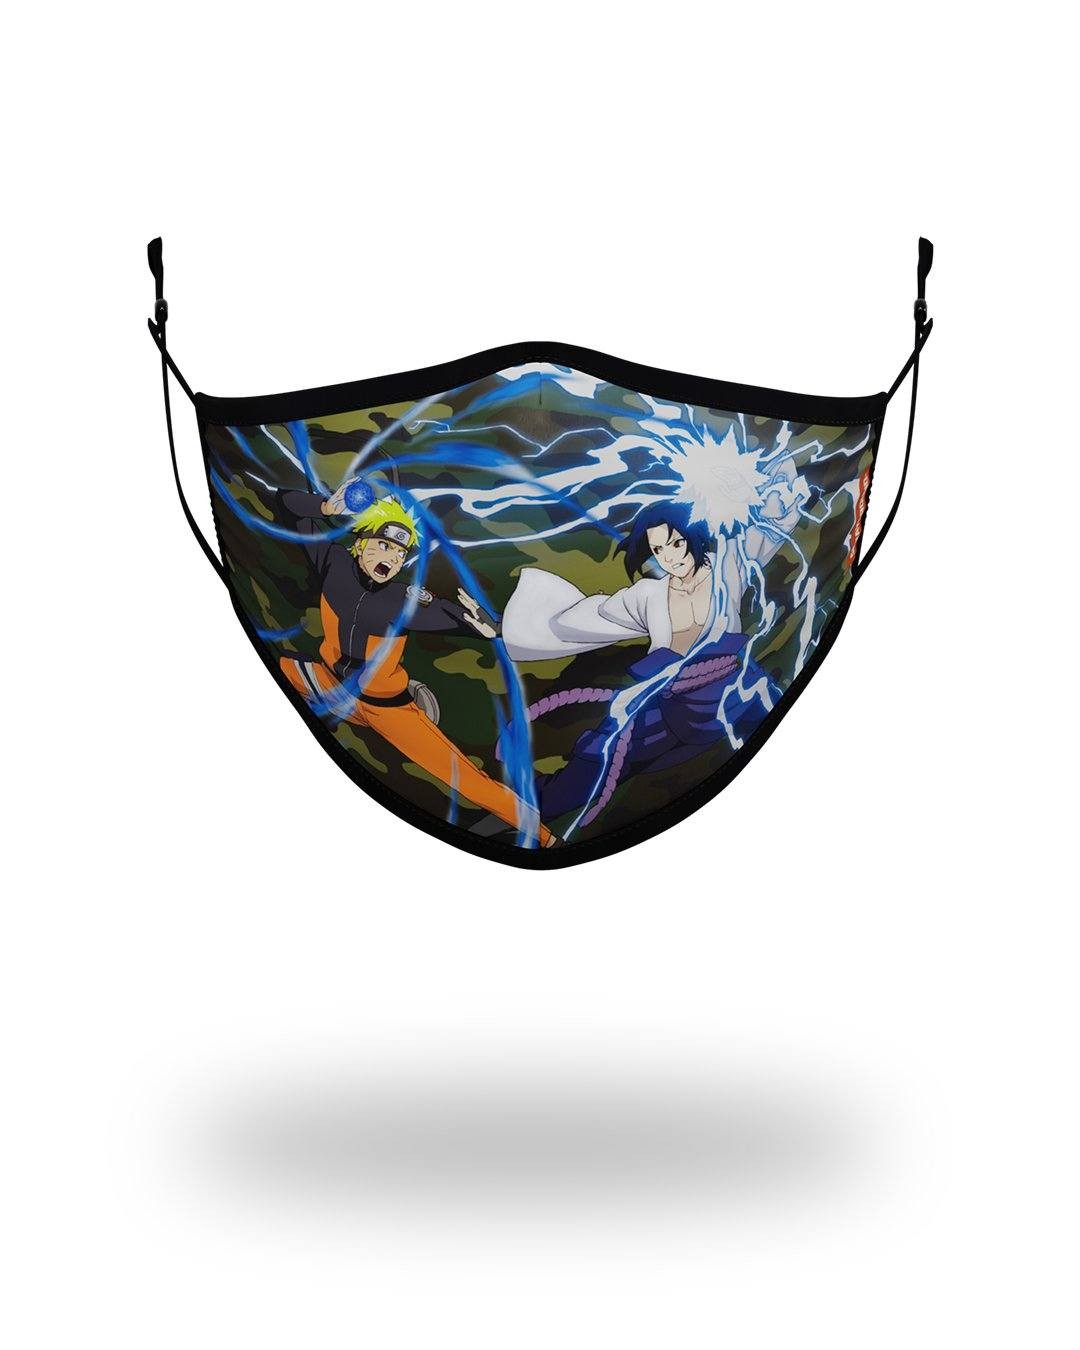 Discount | Adult Naruto Vs Sasuke Form Fitting Face-Covering Sprayground Sale - Discount | Adult Naruto Vs Sasuke Form Fitting Face-Covering Sprayground Sale-01-0